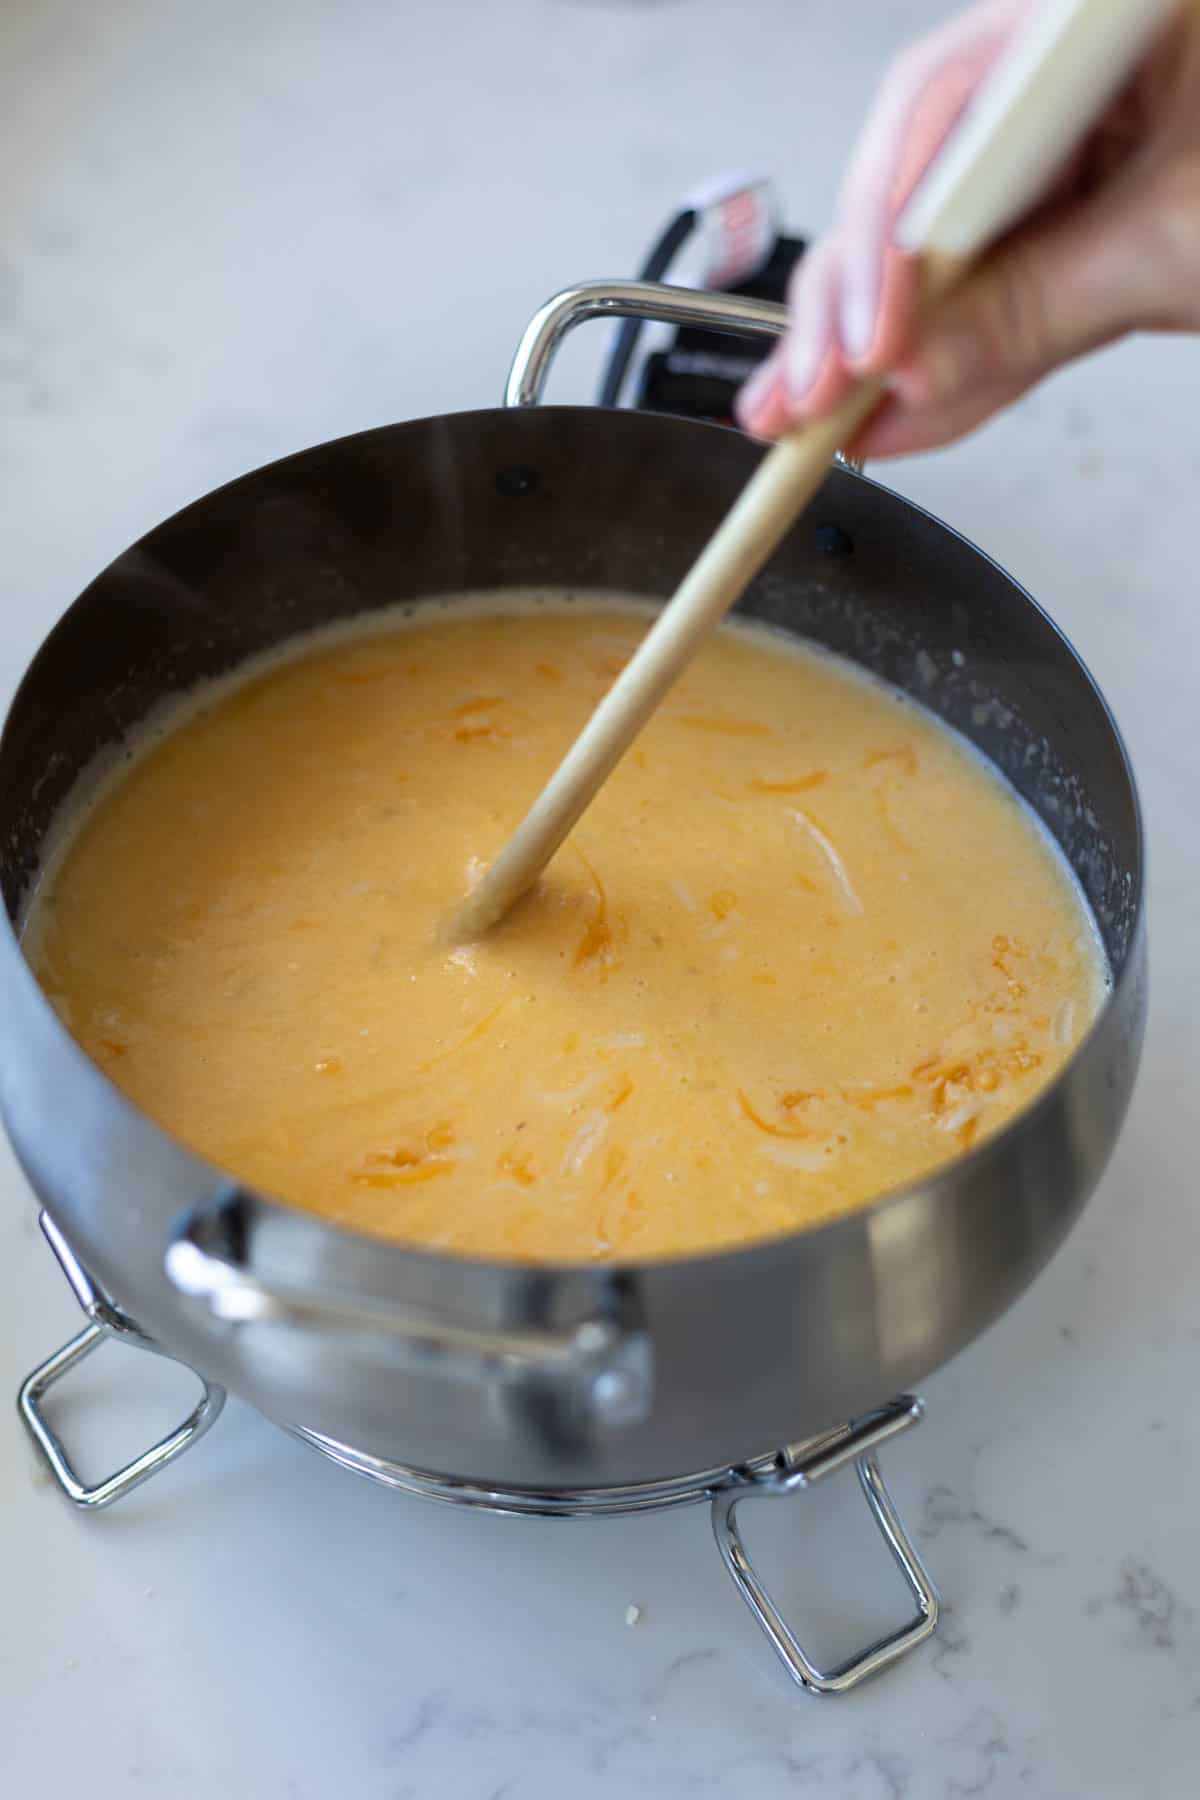 cheese fondue being stirred with a wooden spoon